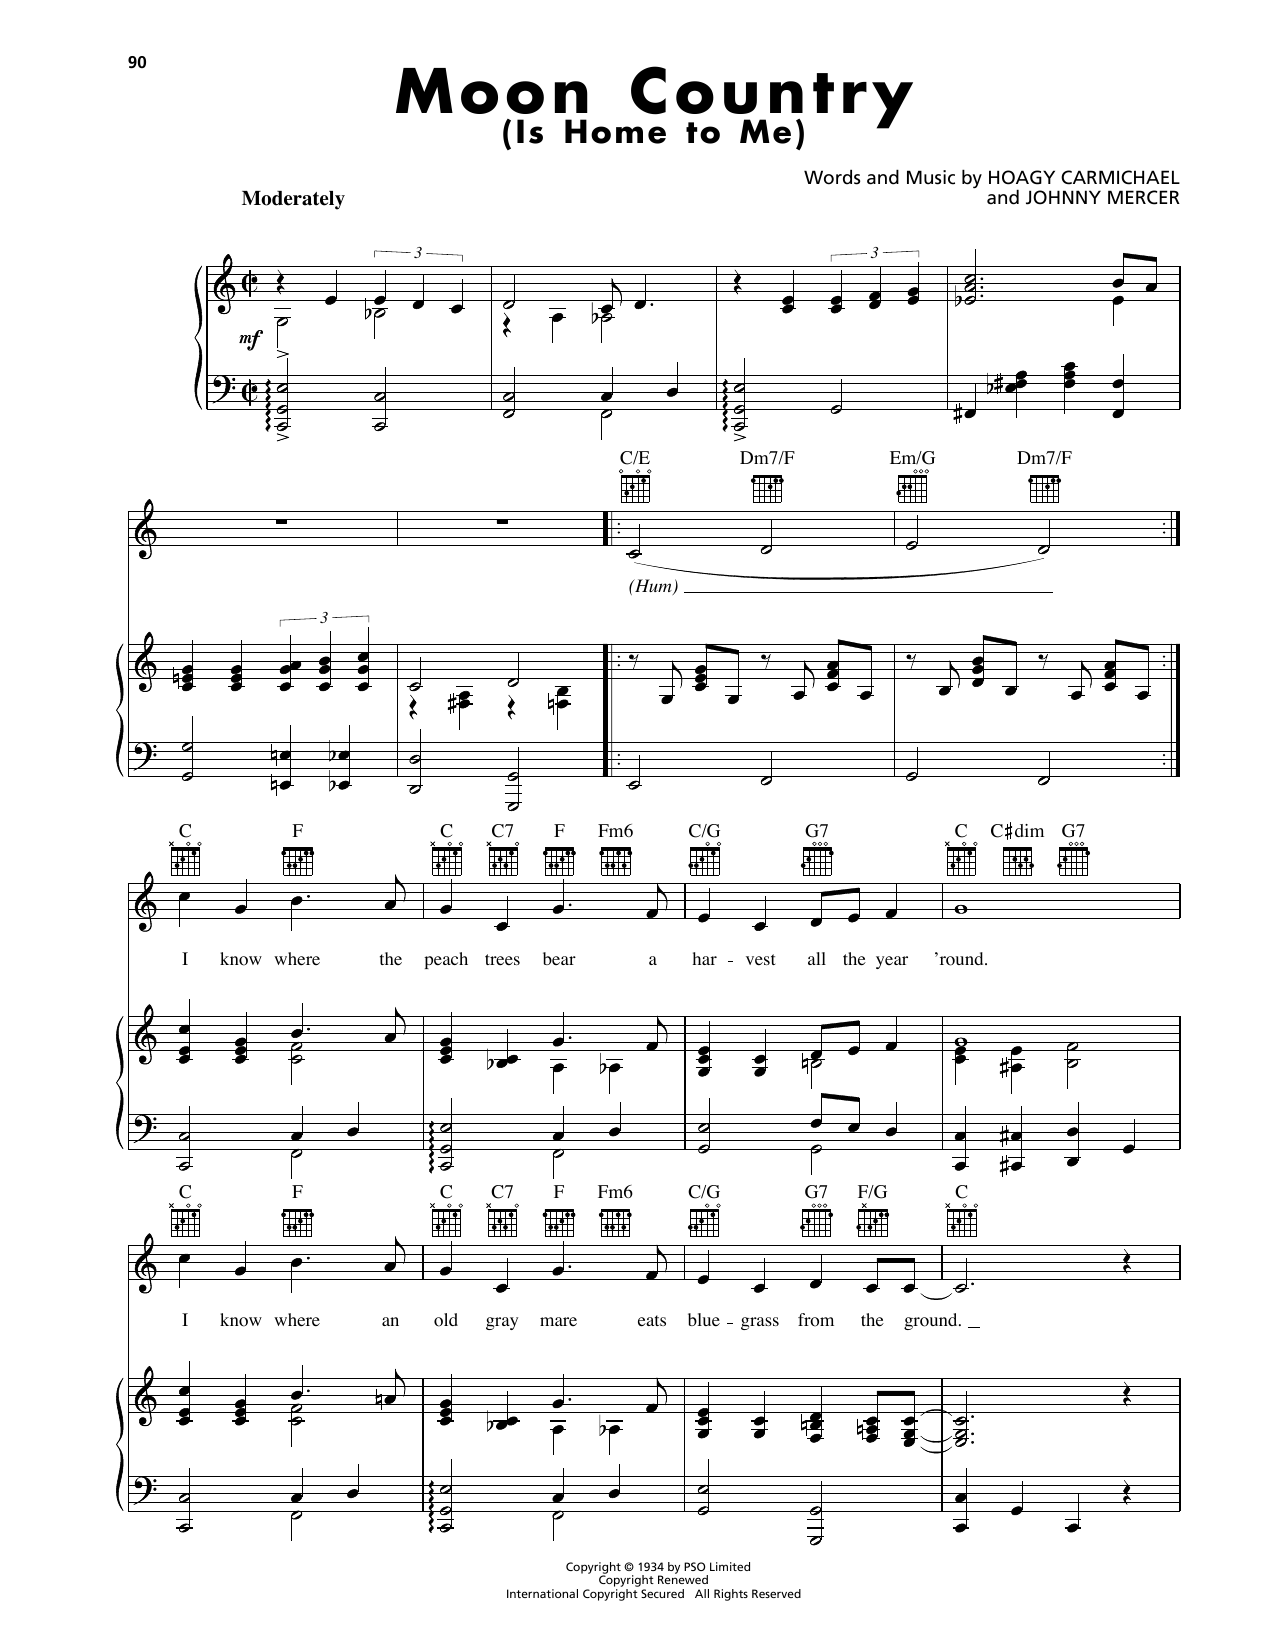 Download Hoagy Carmichael Moon Country (Is Home To Me) Sheet Music